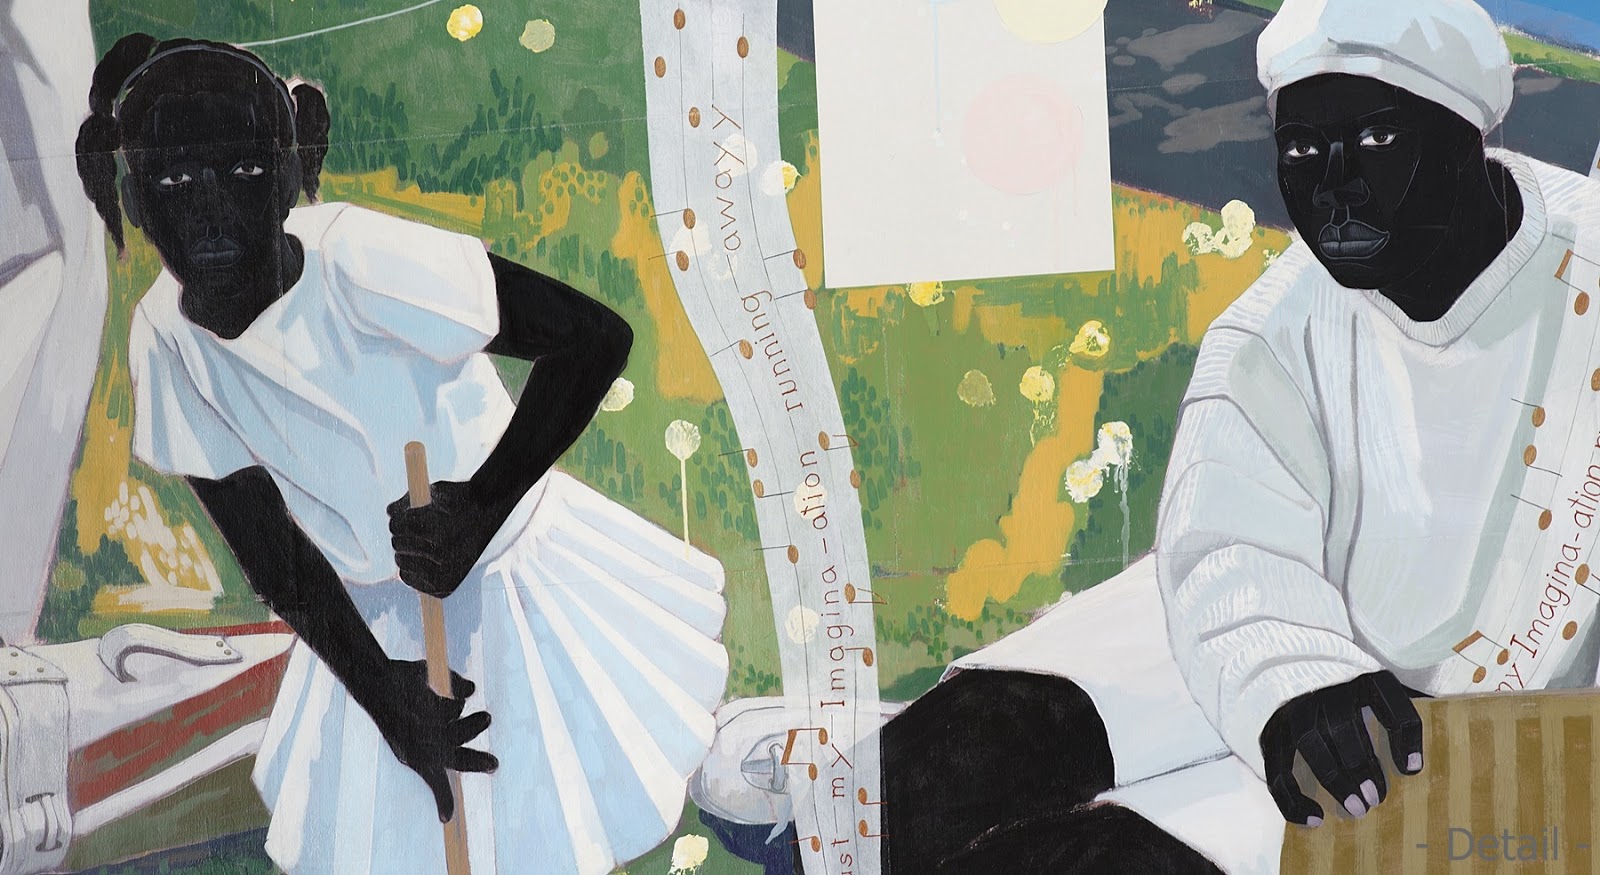 Detail from Past Times (1997) by Kerry James Marshall